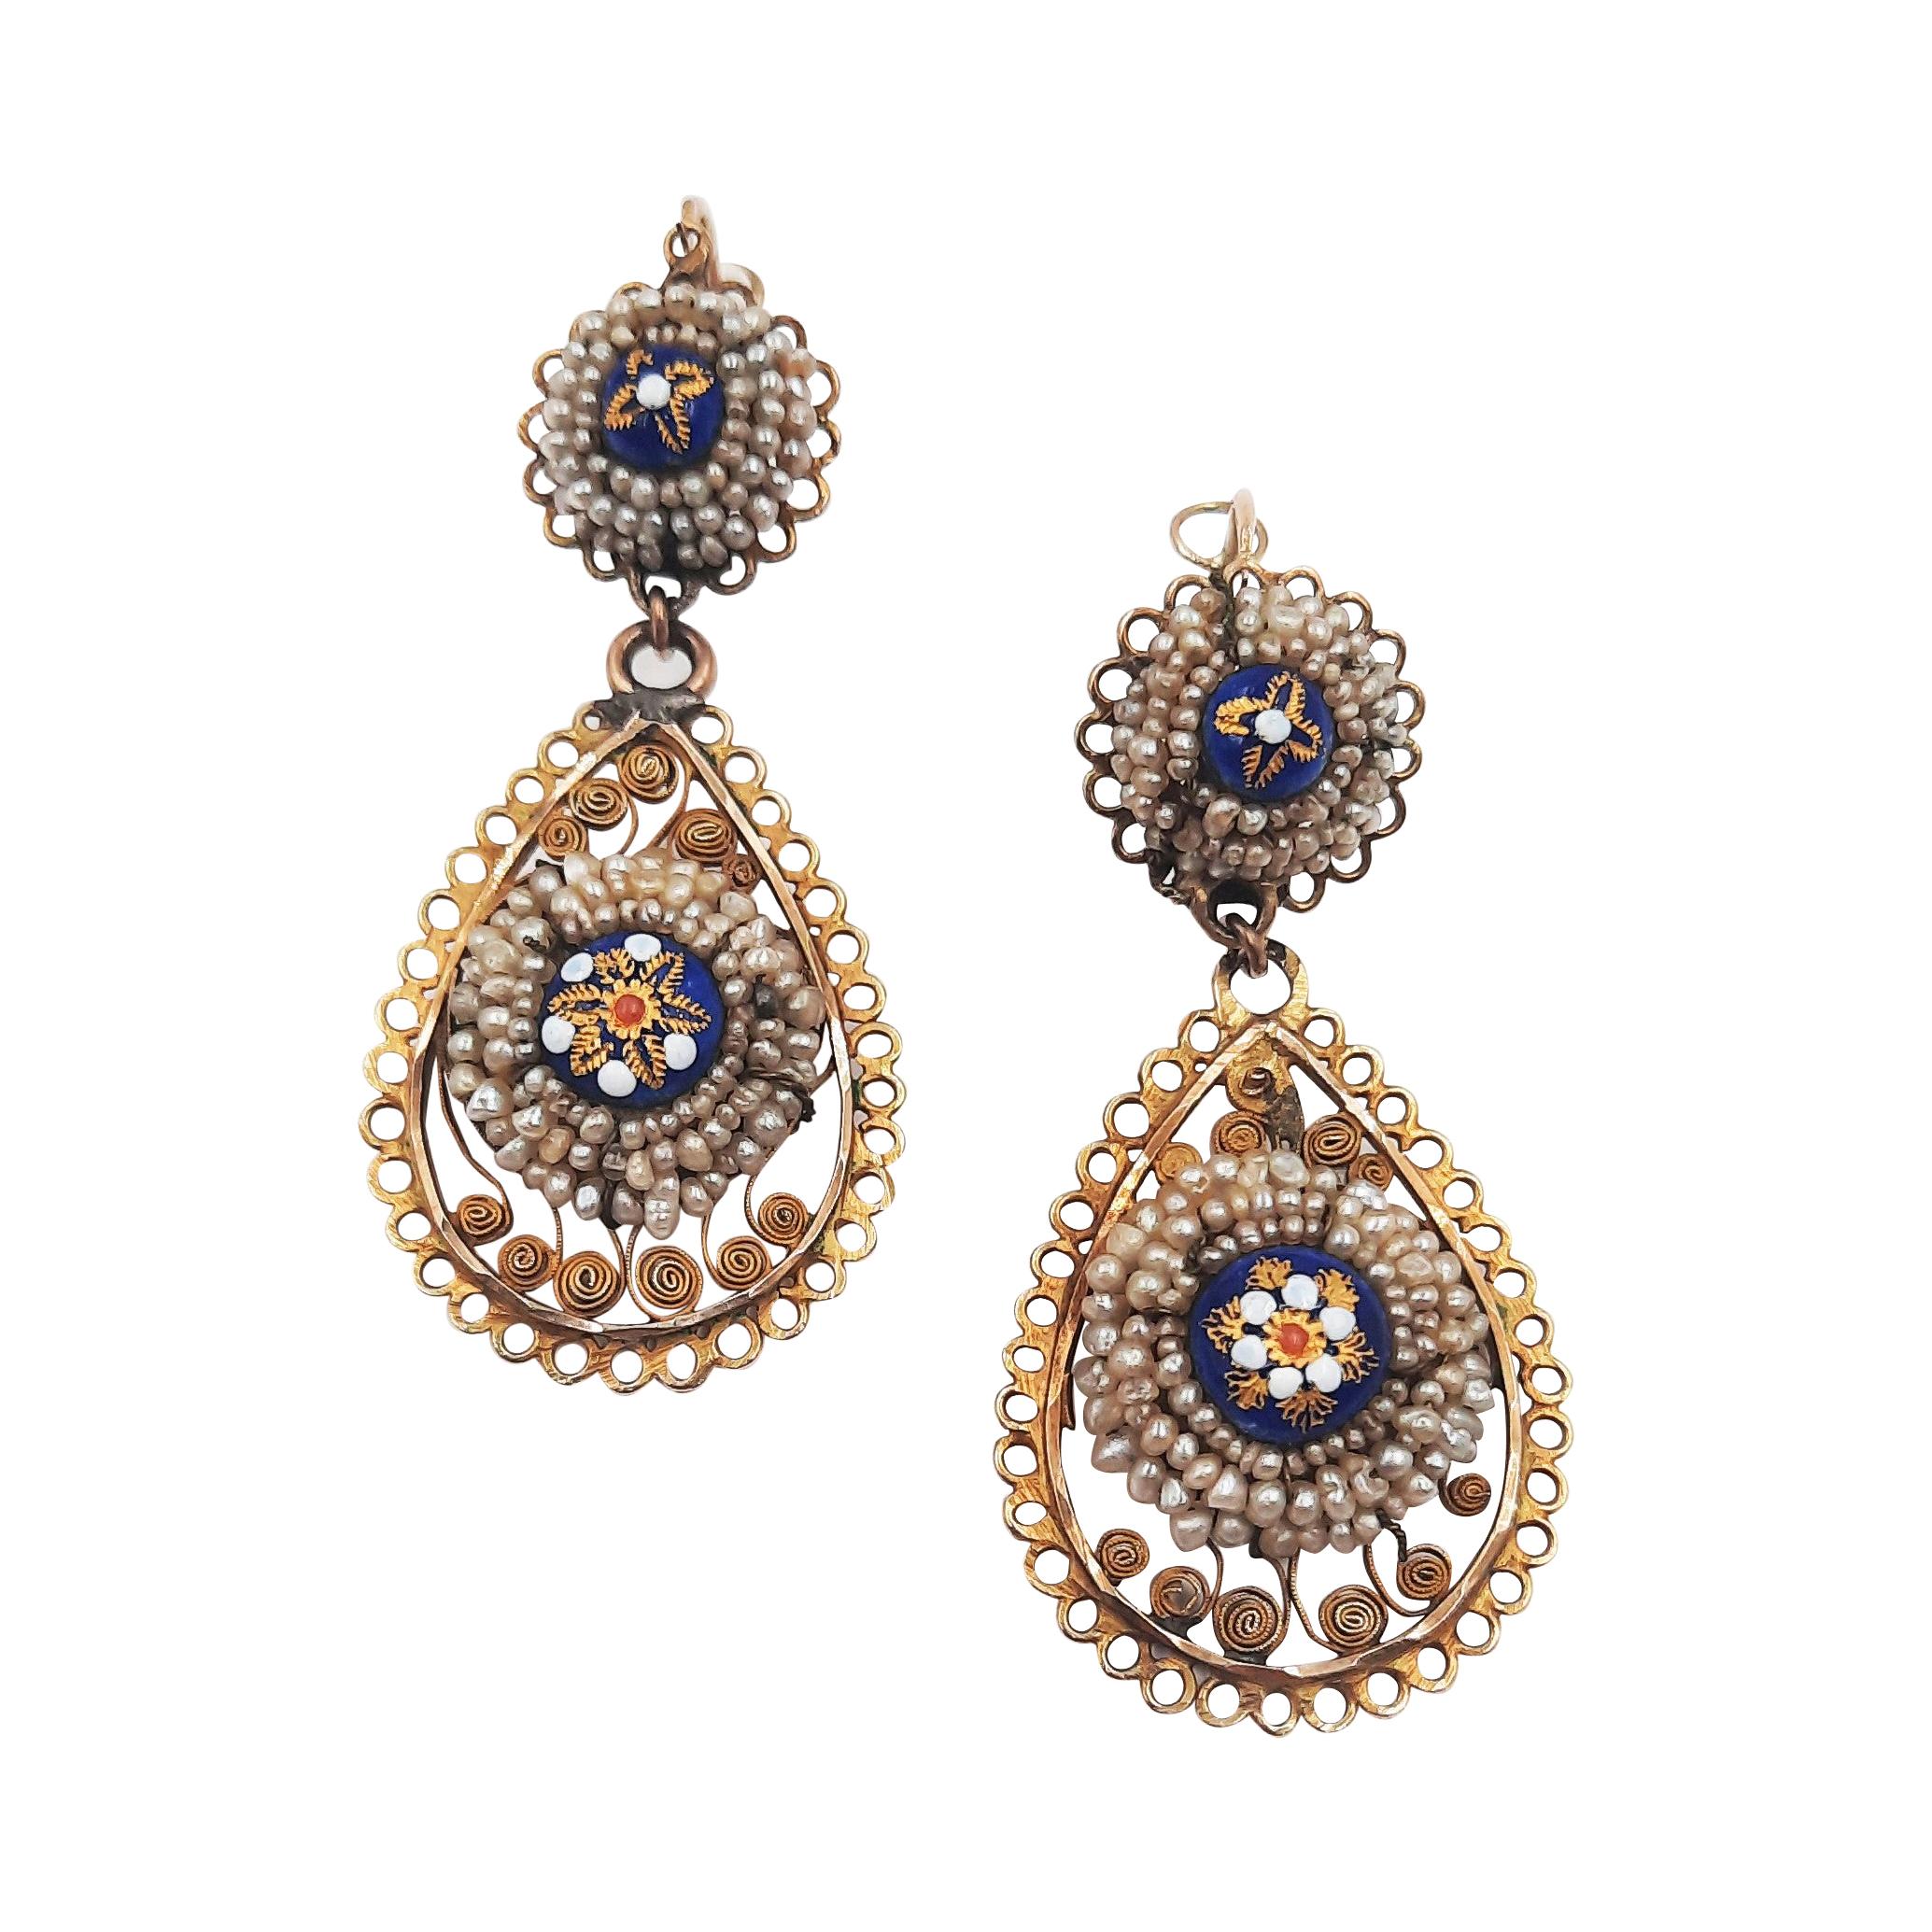 Antique Italian 12 Carats Yellow Gold Filigree Seed Pearl Pendant Earrings For Sale